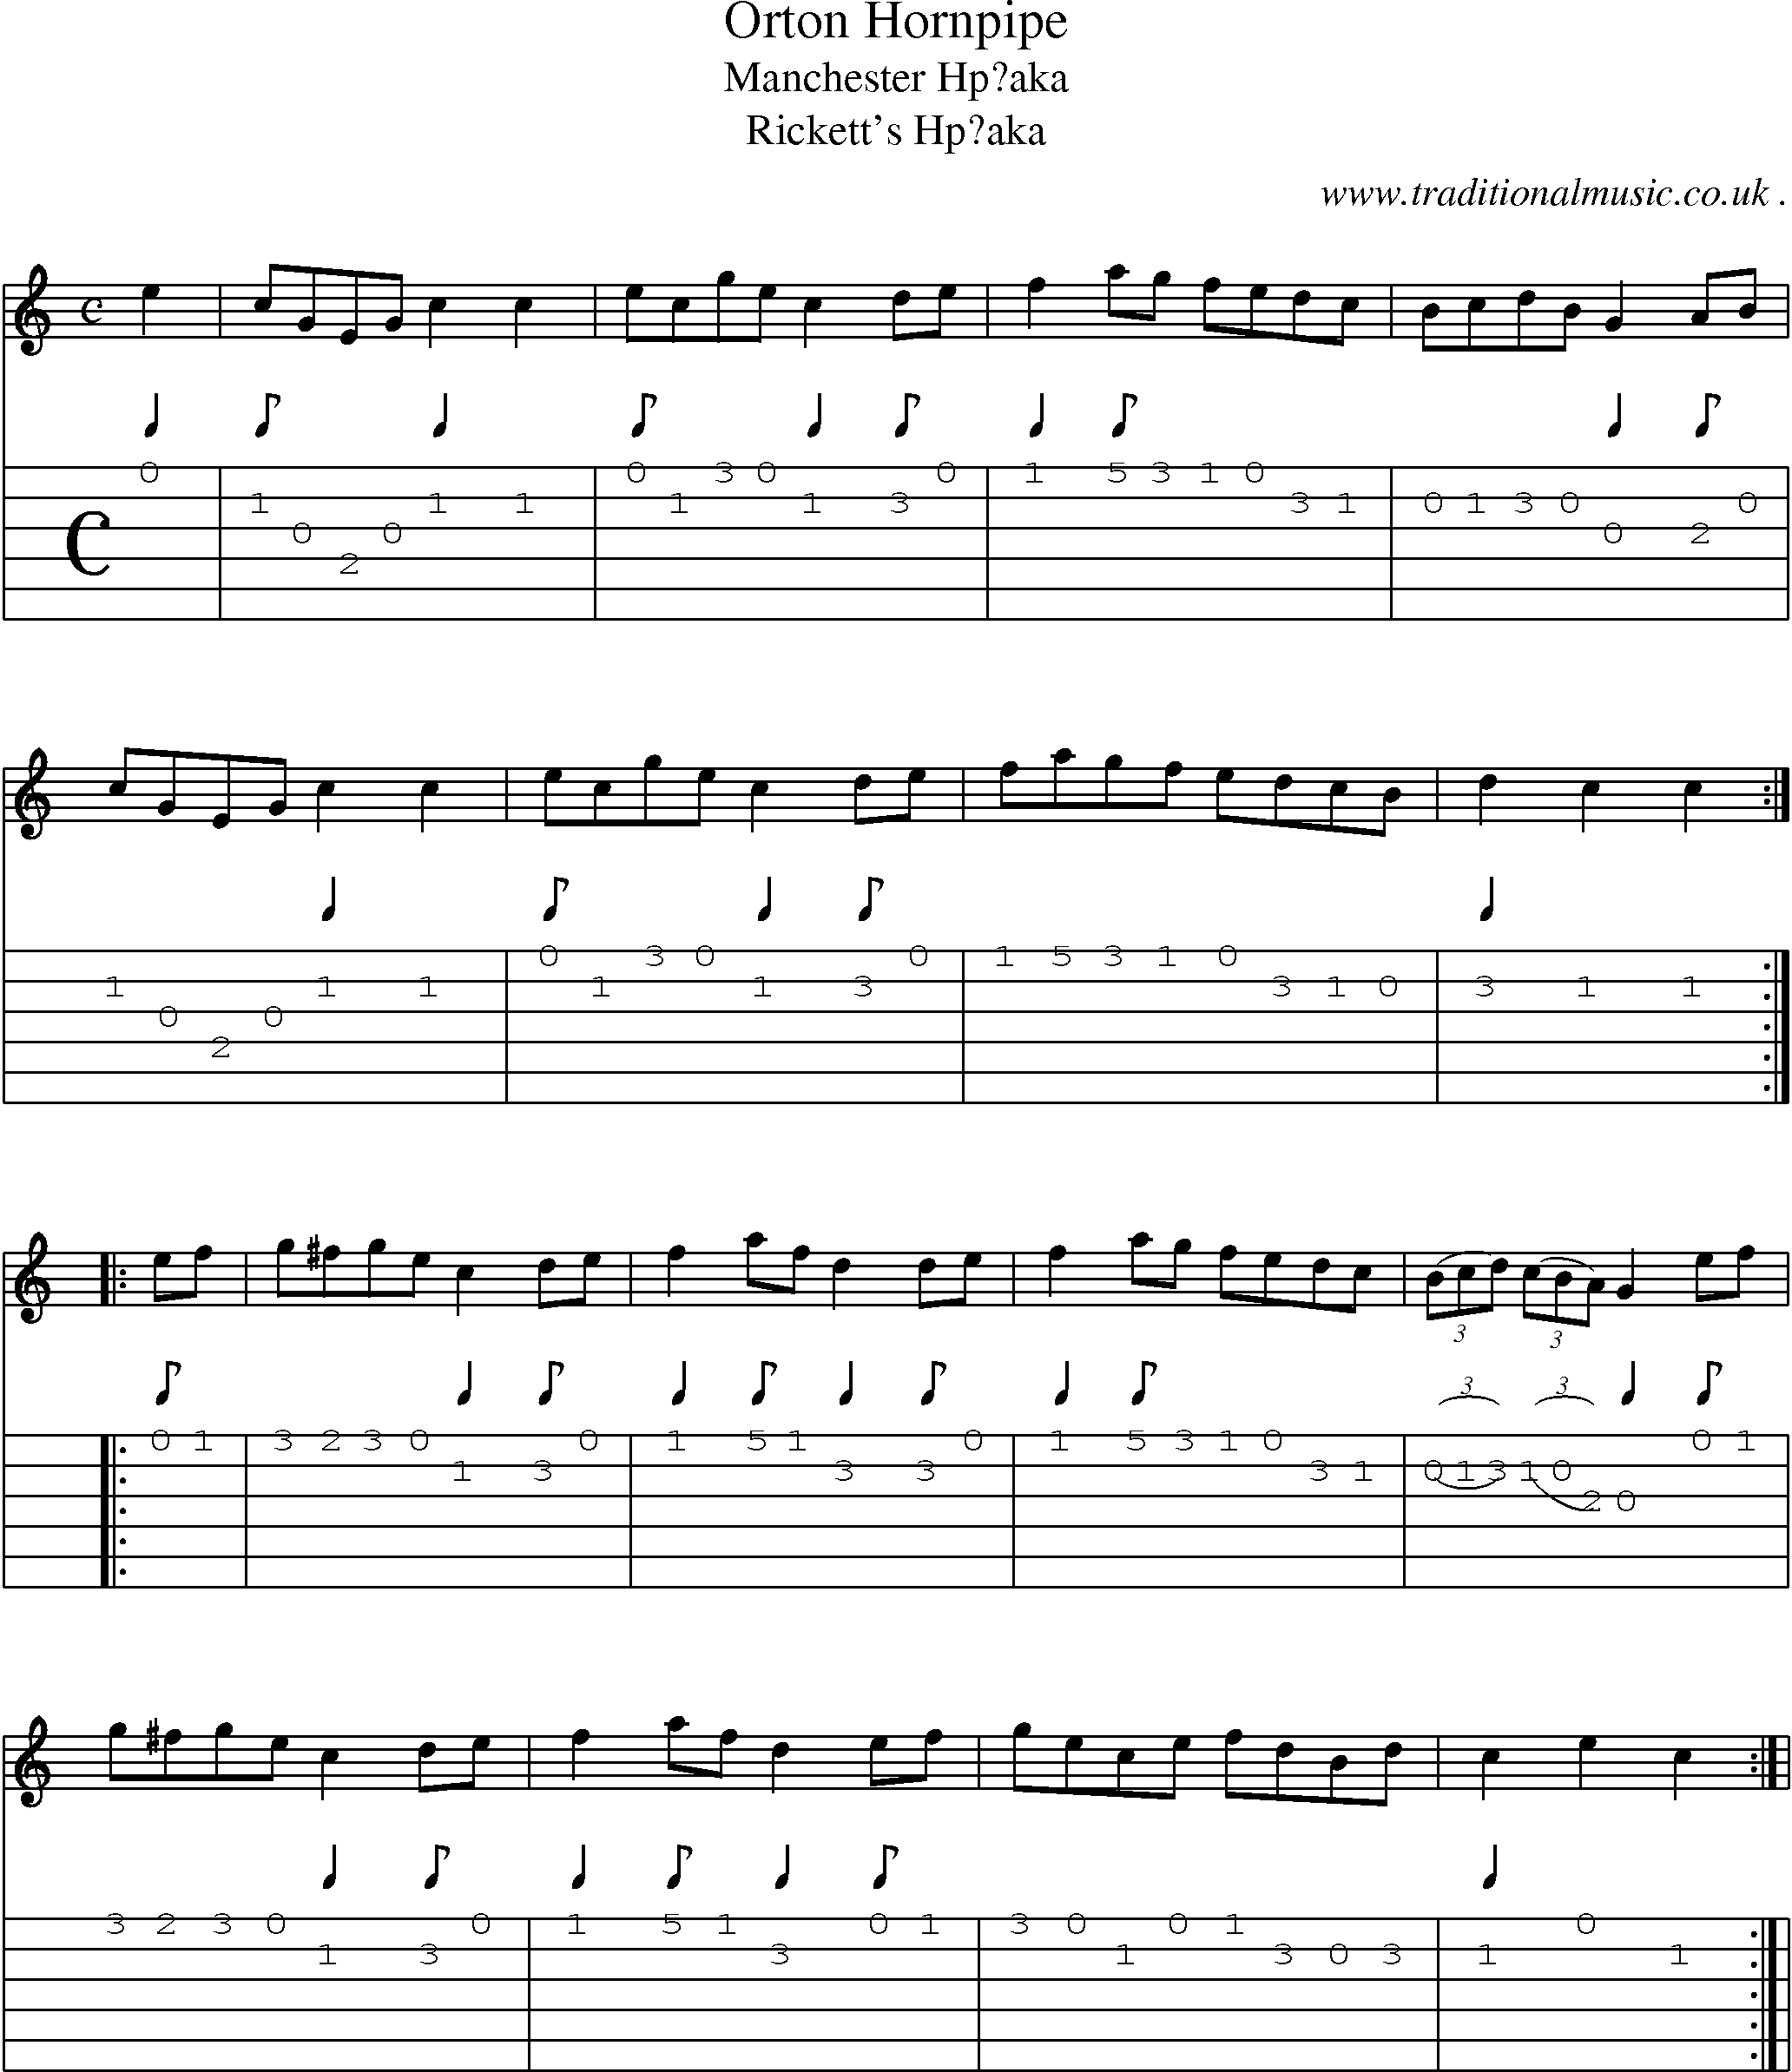 Sheet-Music and Guitar Tabs for Orton Hornpipe